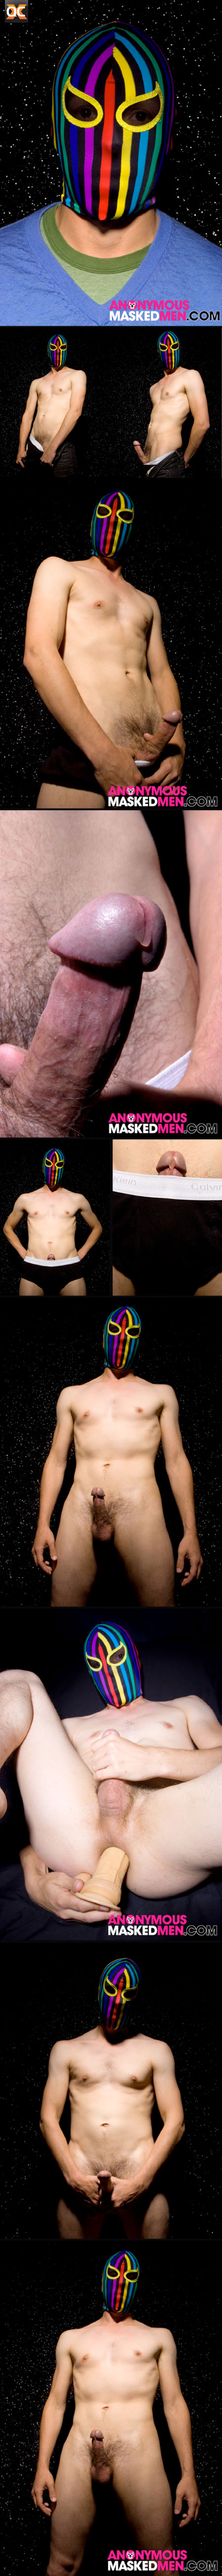 anonymous masked men exhibitionist